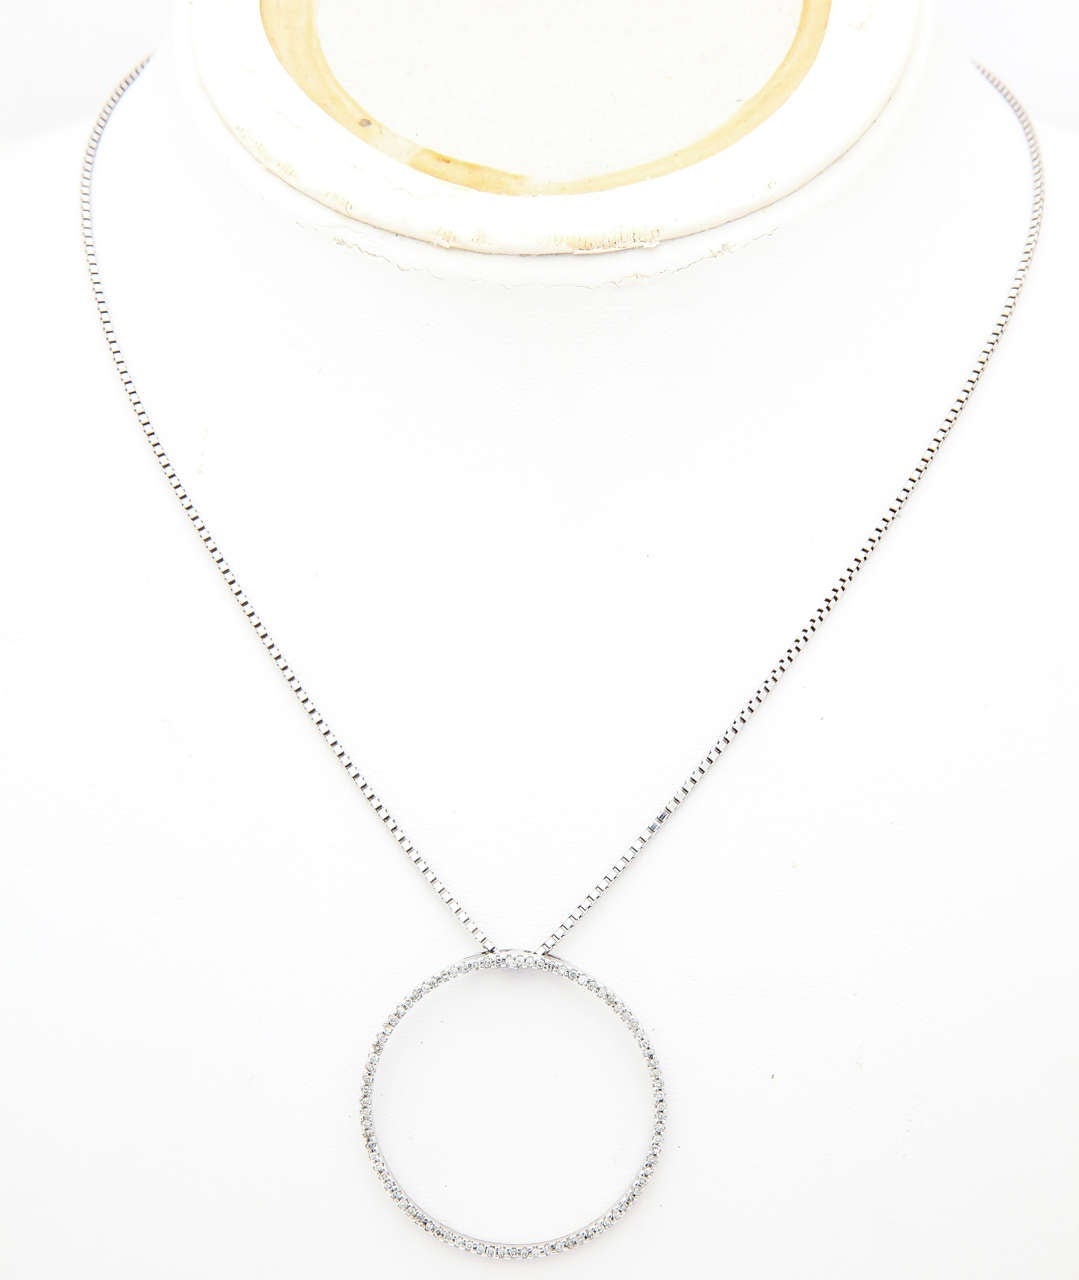 The Circle of Love pendant forms a perfect circle with no beginning and no end signifying your love. It is a promise of everlasting devotion, never to be broken. The pendant and chain are 14 kt white gold with 0.35 cts white diamond micro-pave set.